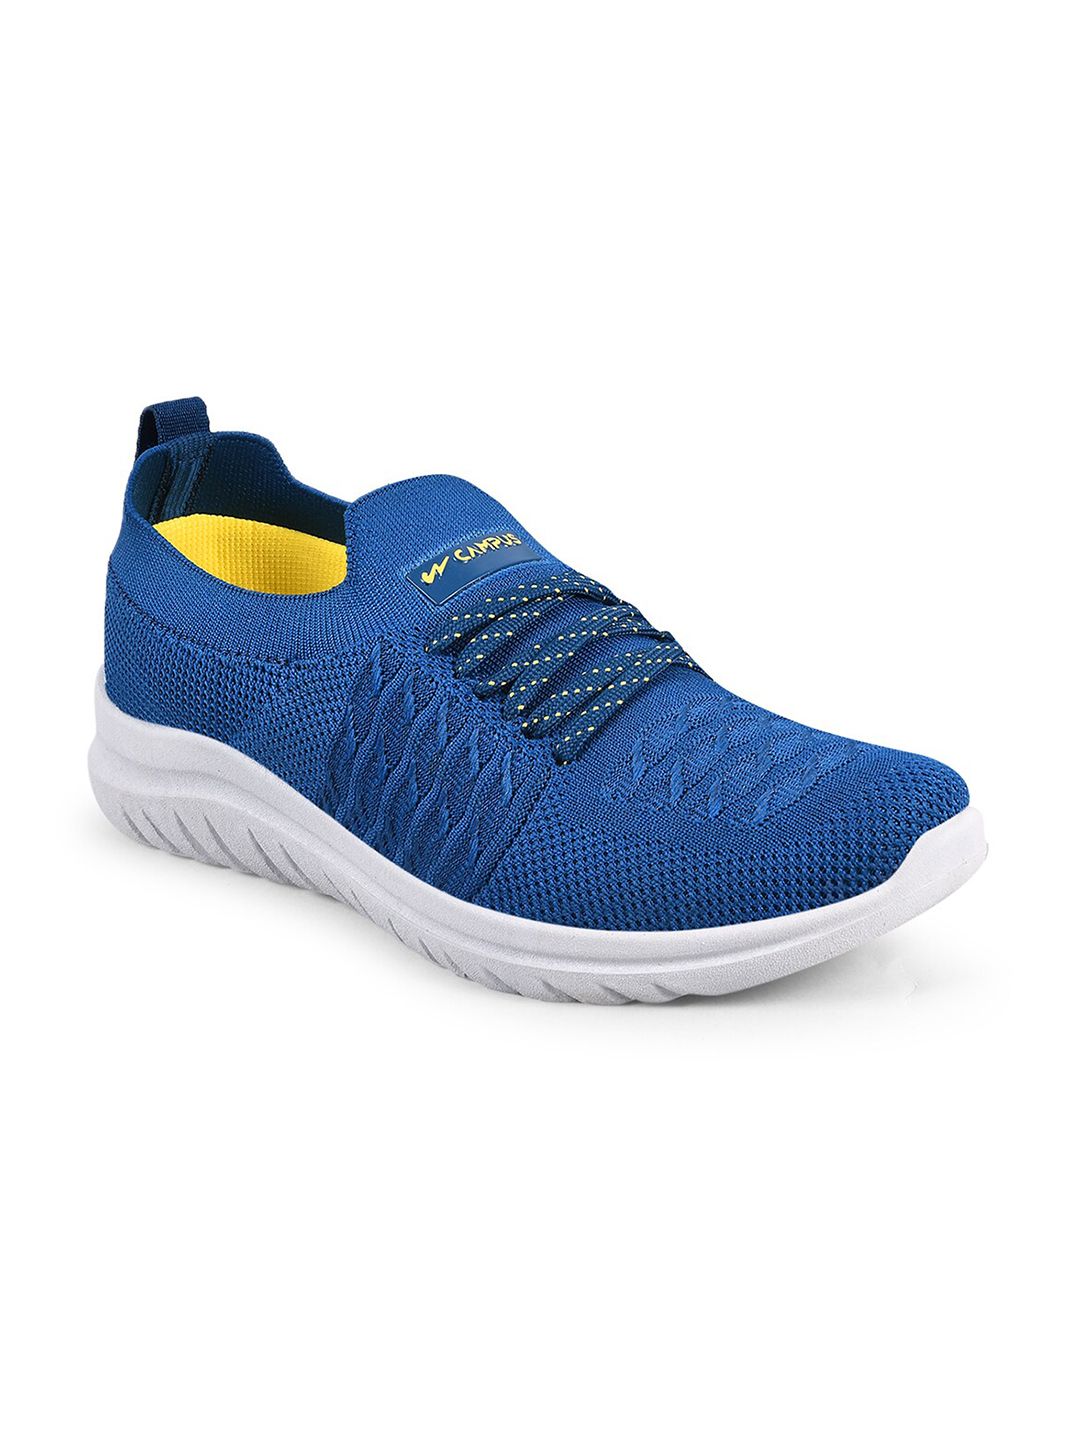 Campus Women Blue & Yellow Lace-Ups Mesh Running Shoes Price in India